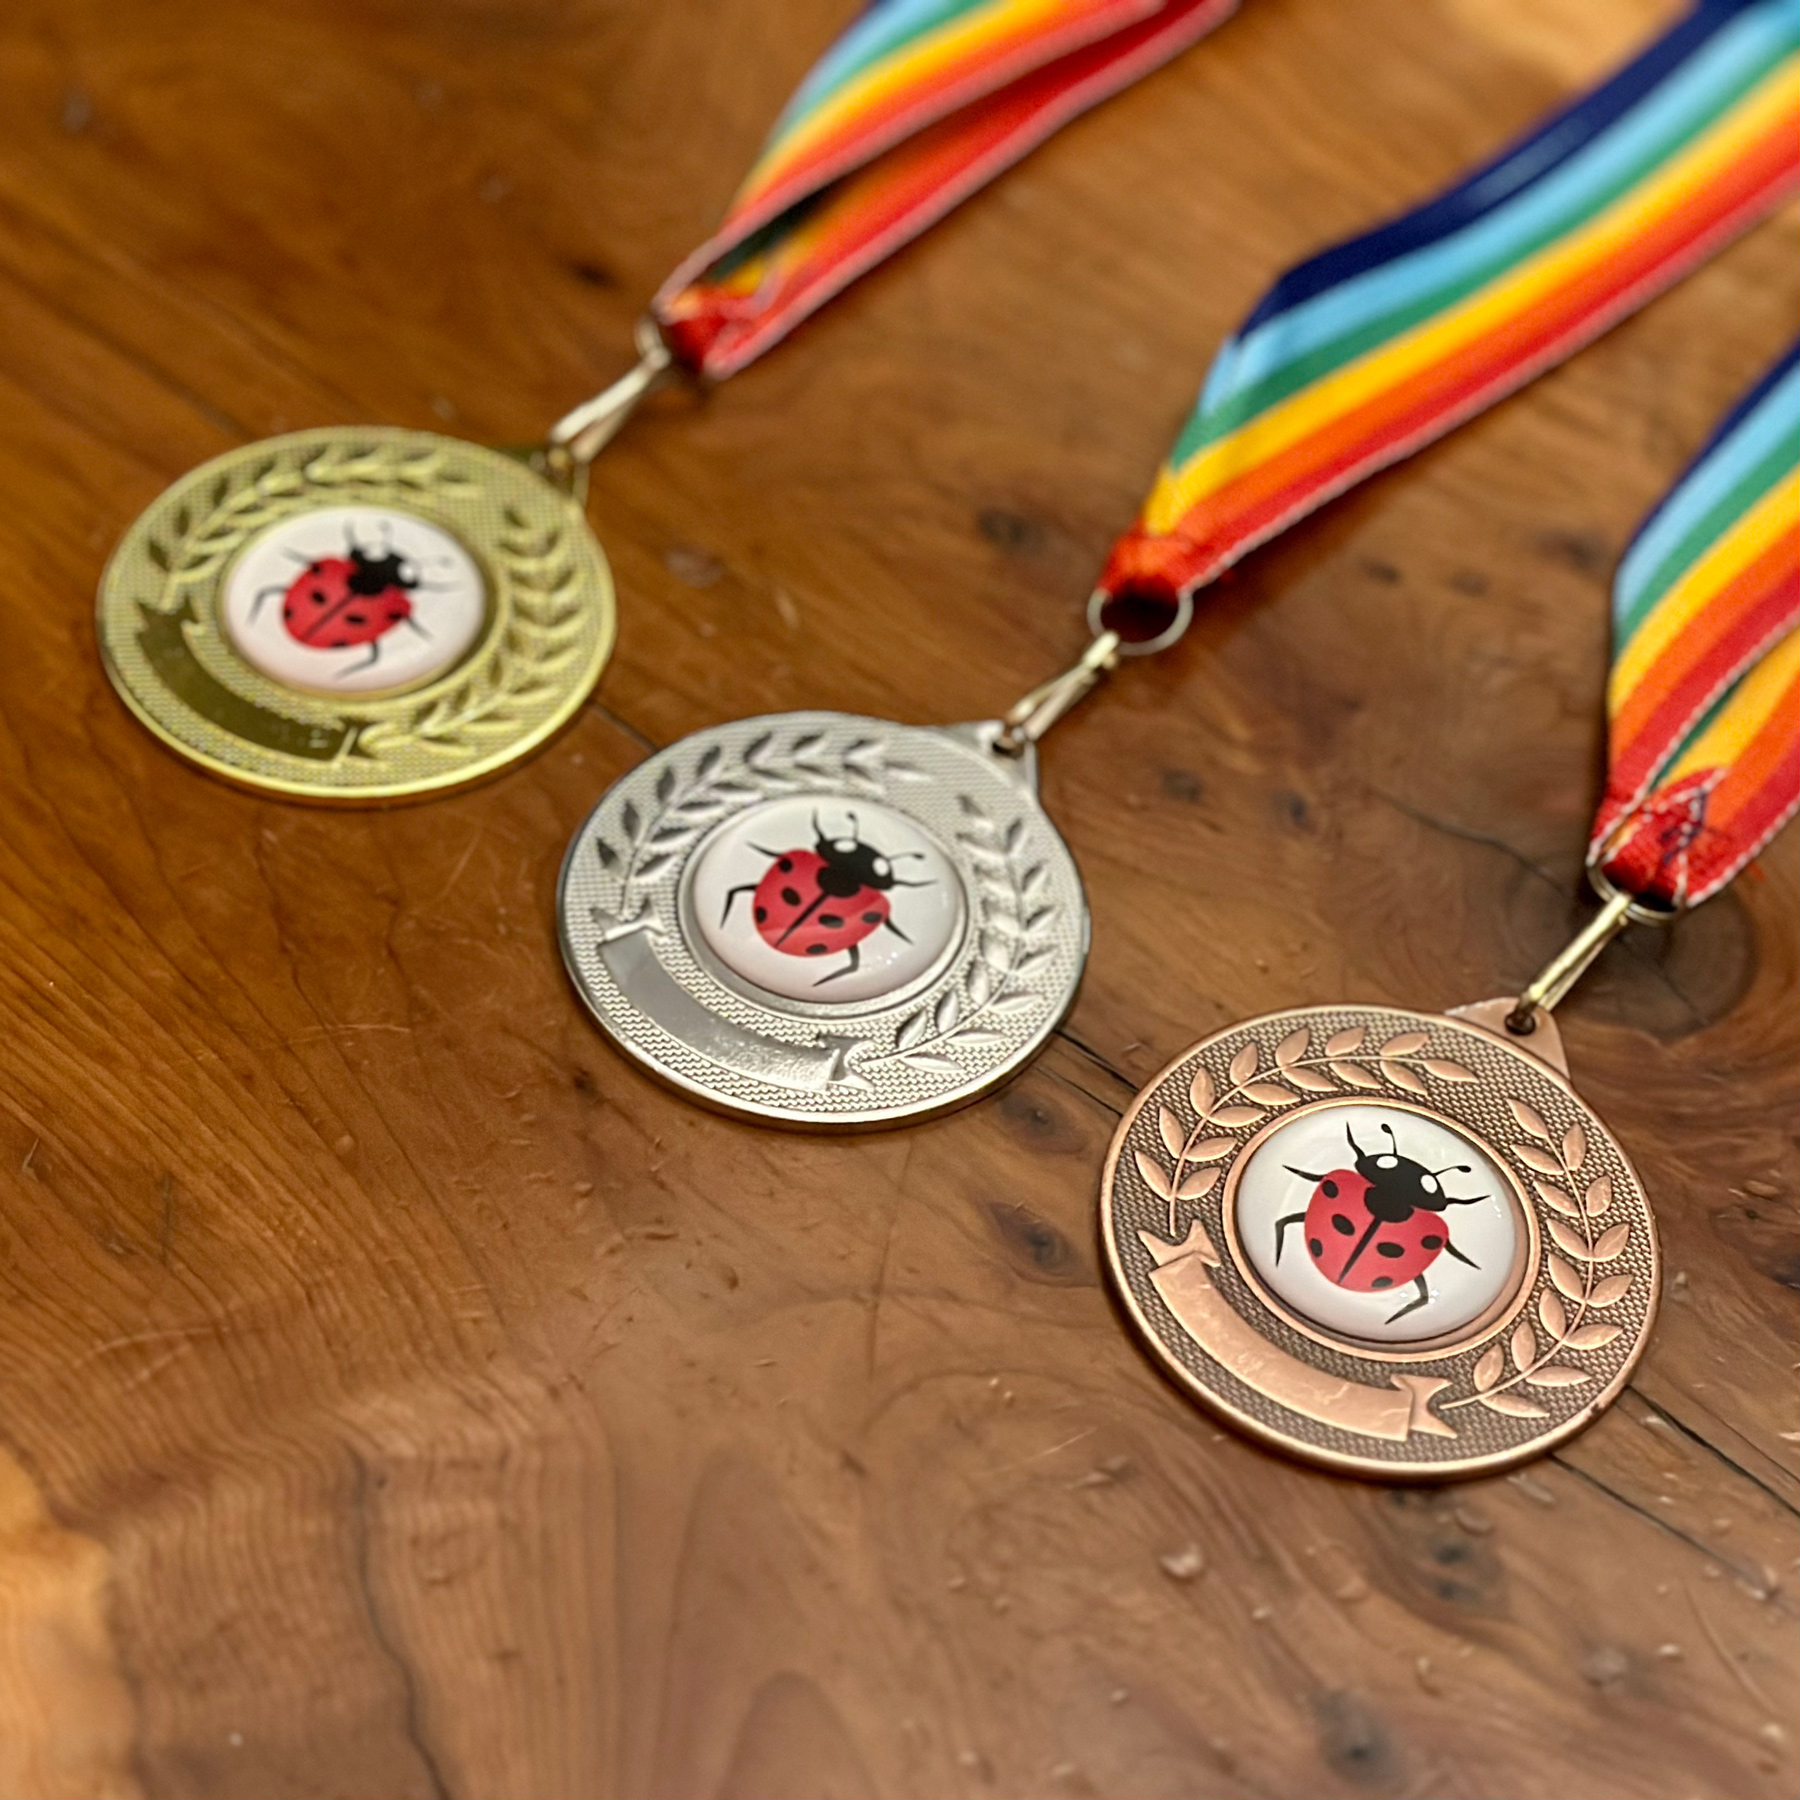 Three medals in gold, silver, and bronze colours. Each medal has a bug emoji in the middle and has a rainbow ribbon attached.